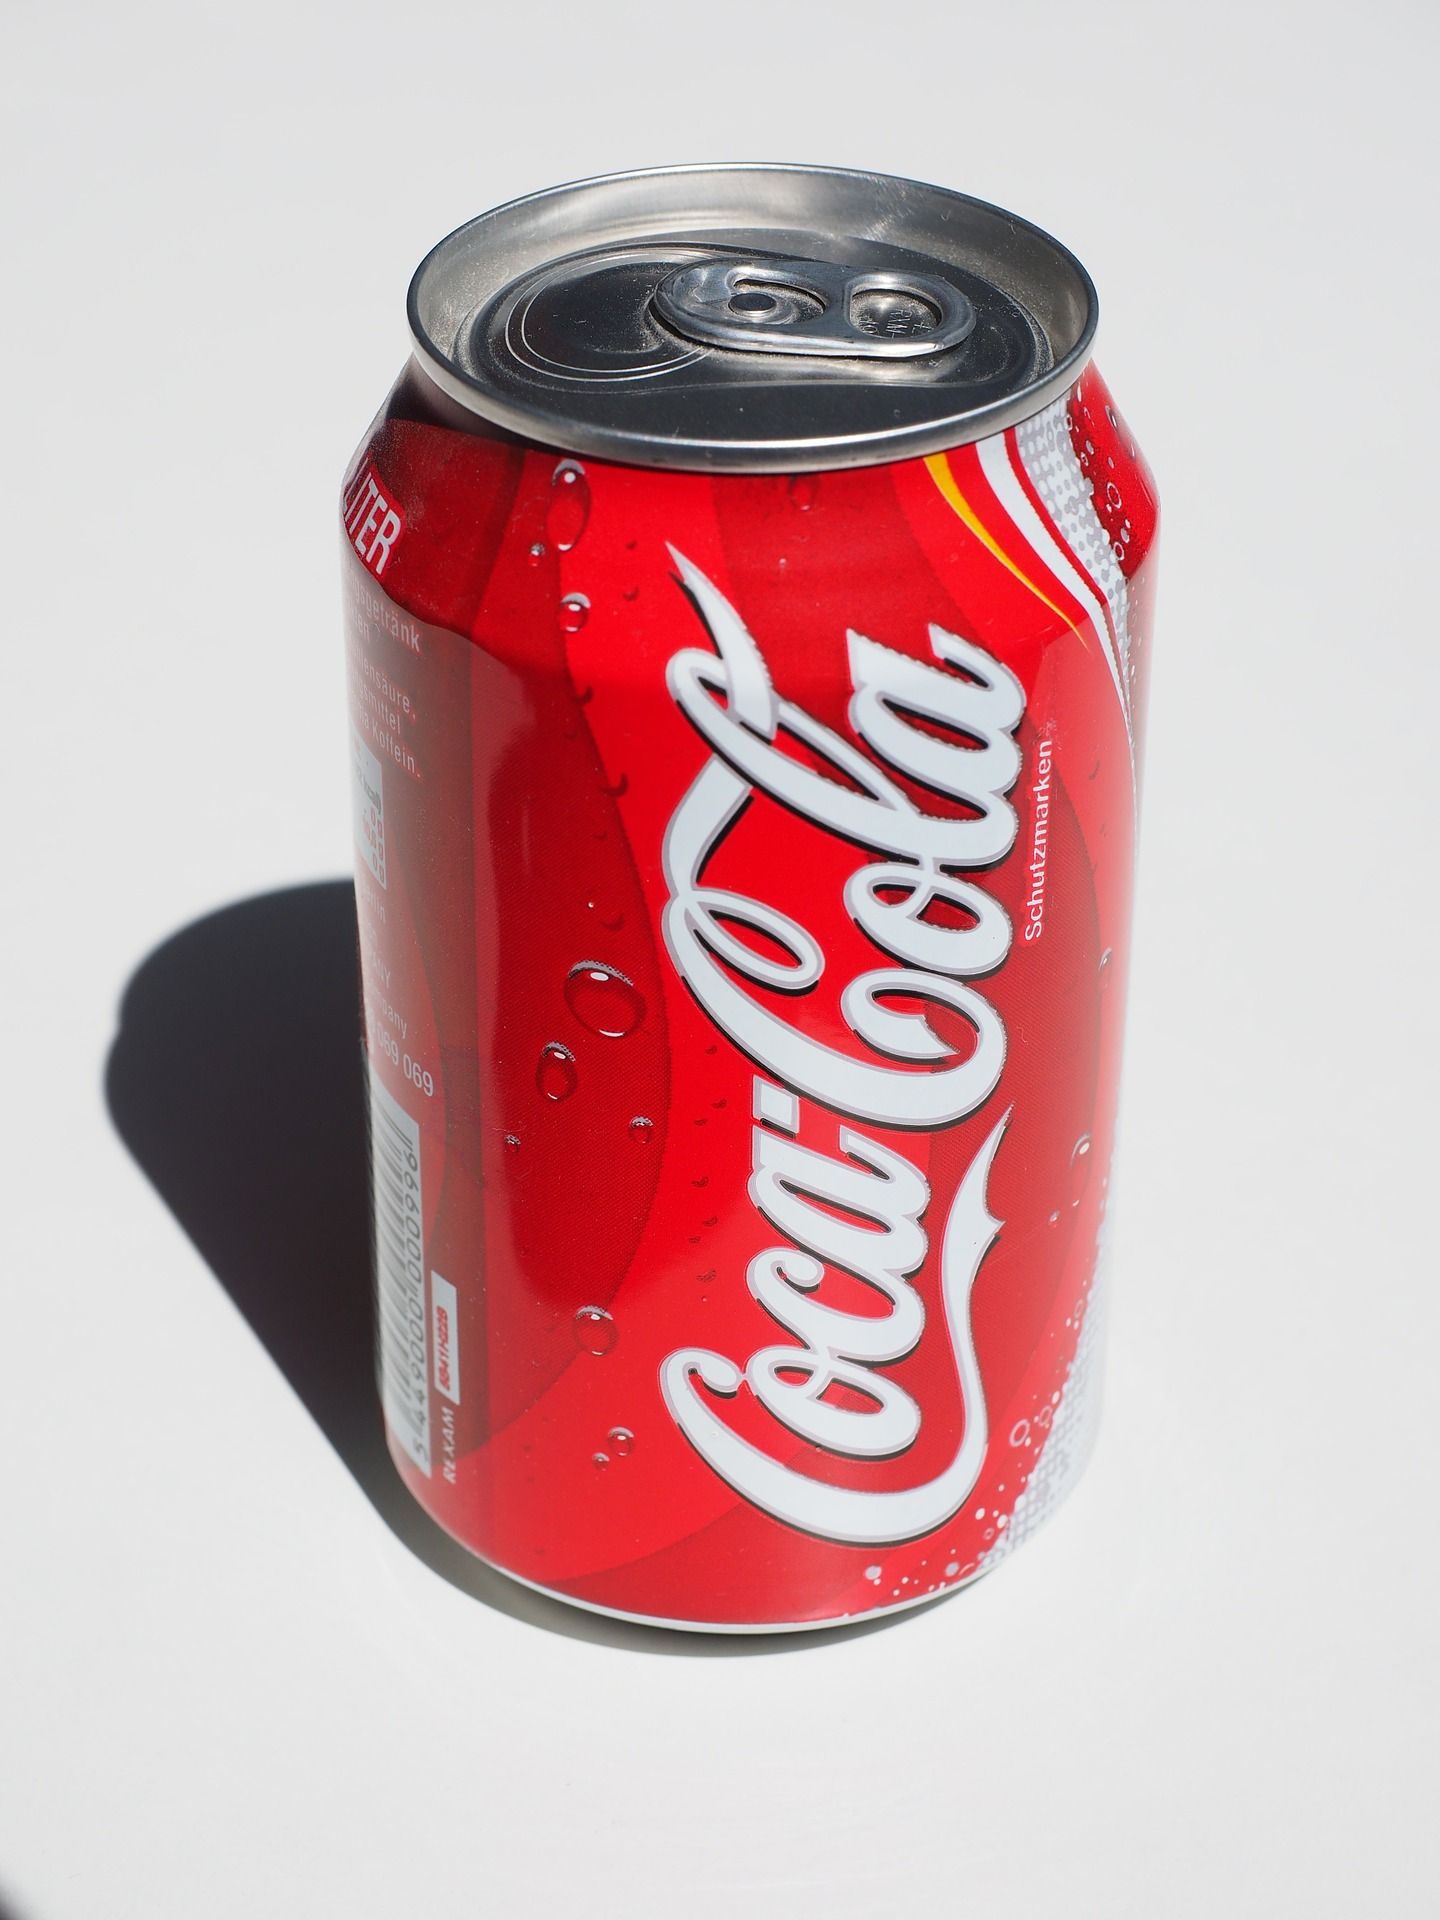 Can of Coca-Cola